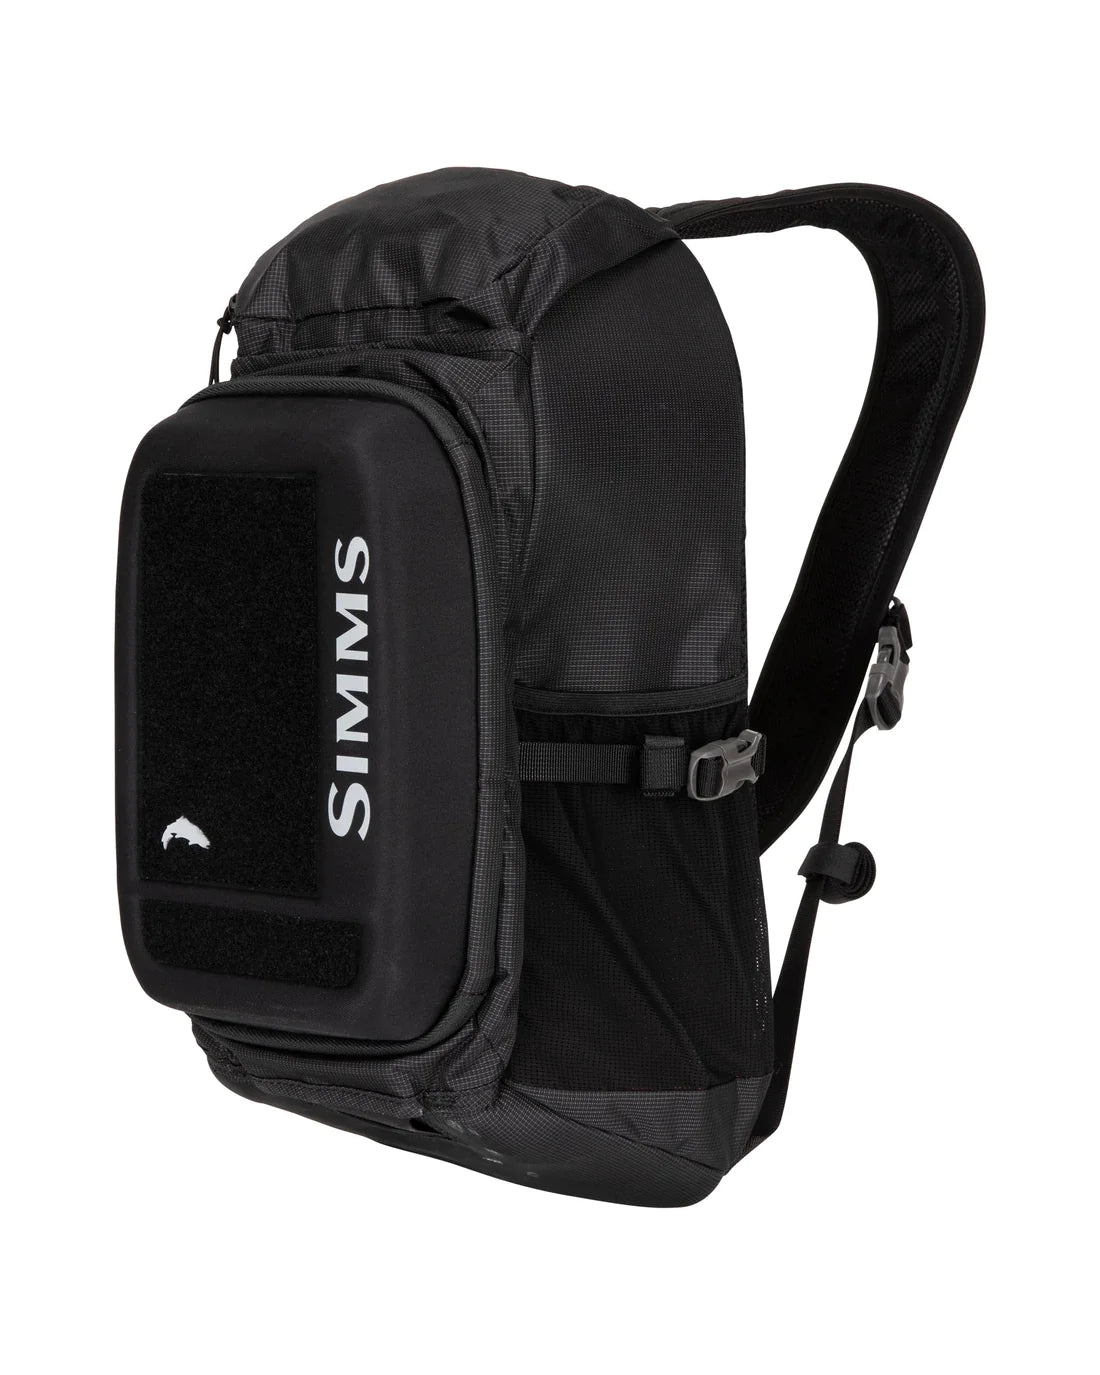 Simms Freestone Sling Pack - BLACK - Mansfield Hunting & Fishing - Products to prepare for Corona Virus